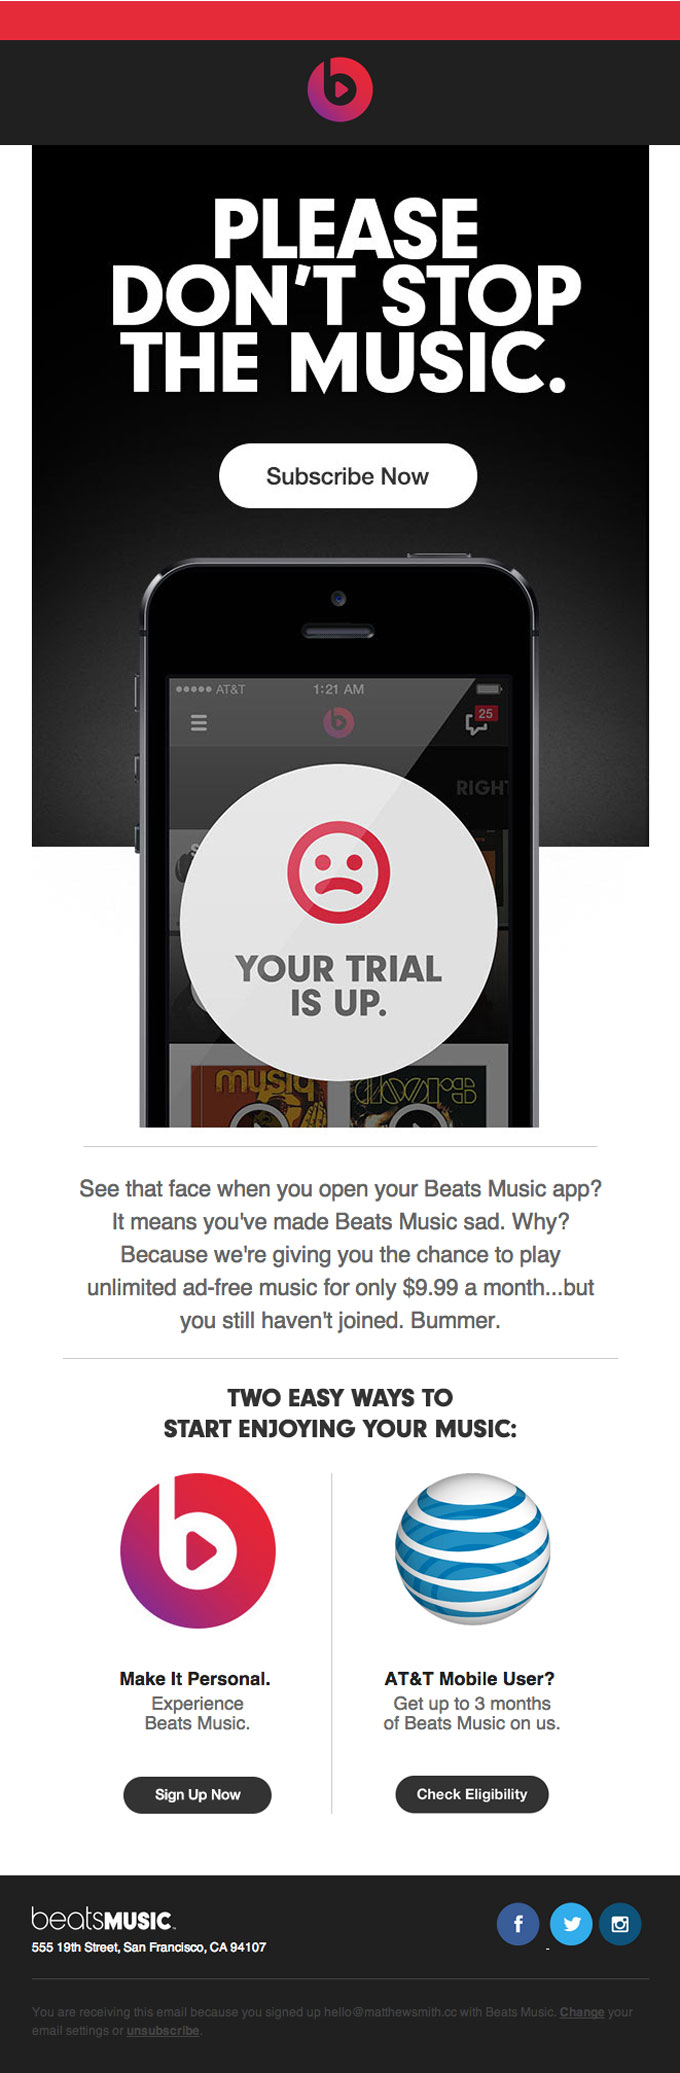 Customer Retention Email Design from Beats Music